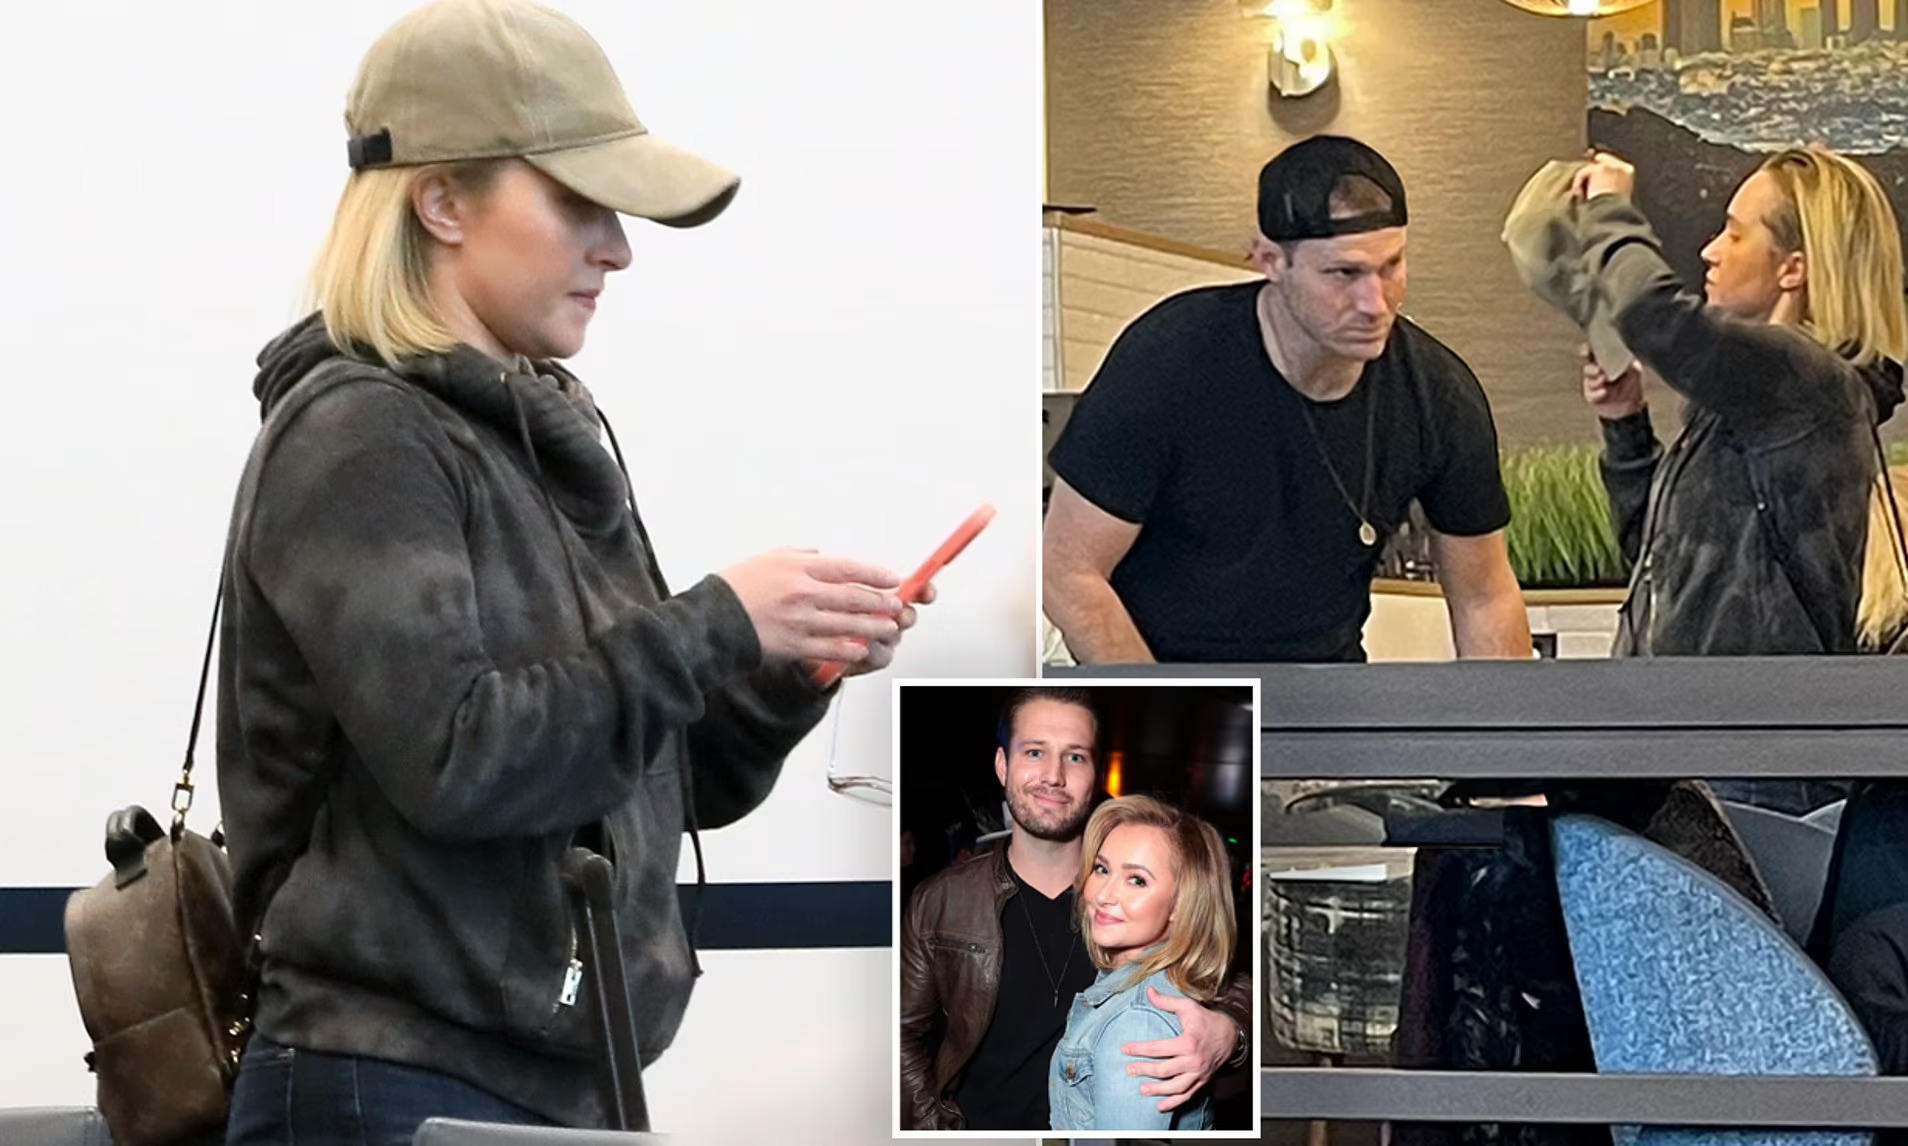 Hayden Panettiere And Brian Hickerson Were Seen Together Eight Months After Their Wild LA Bar Brawl